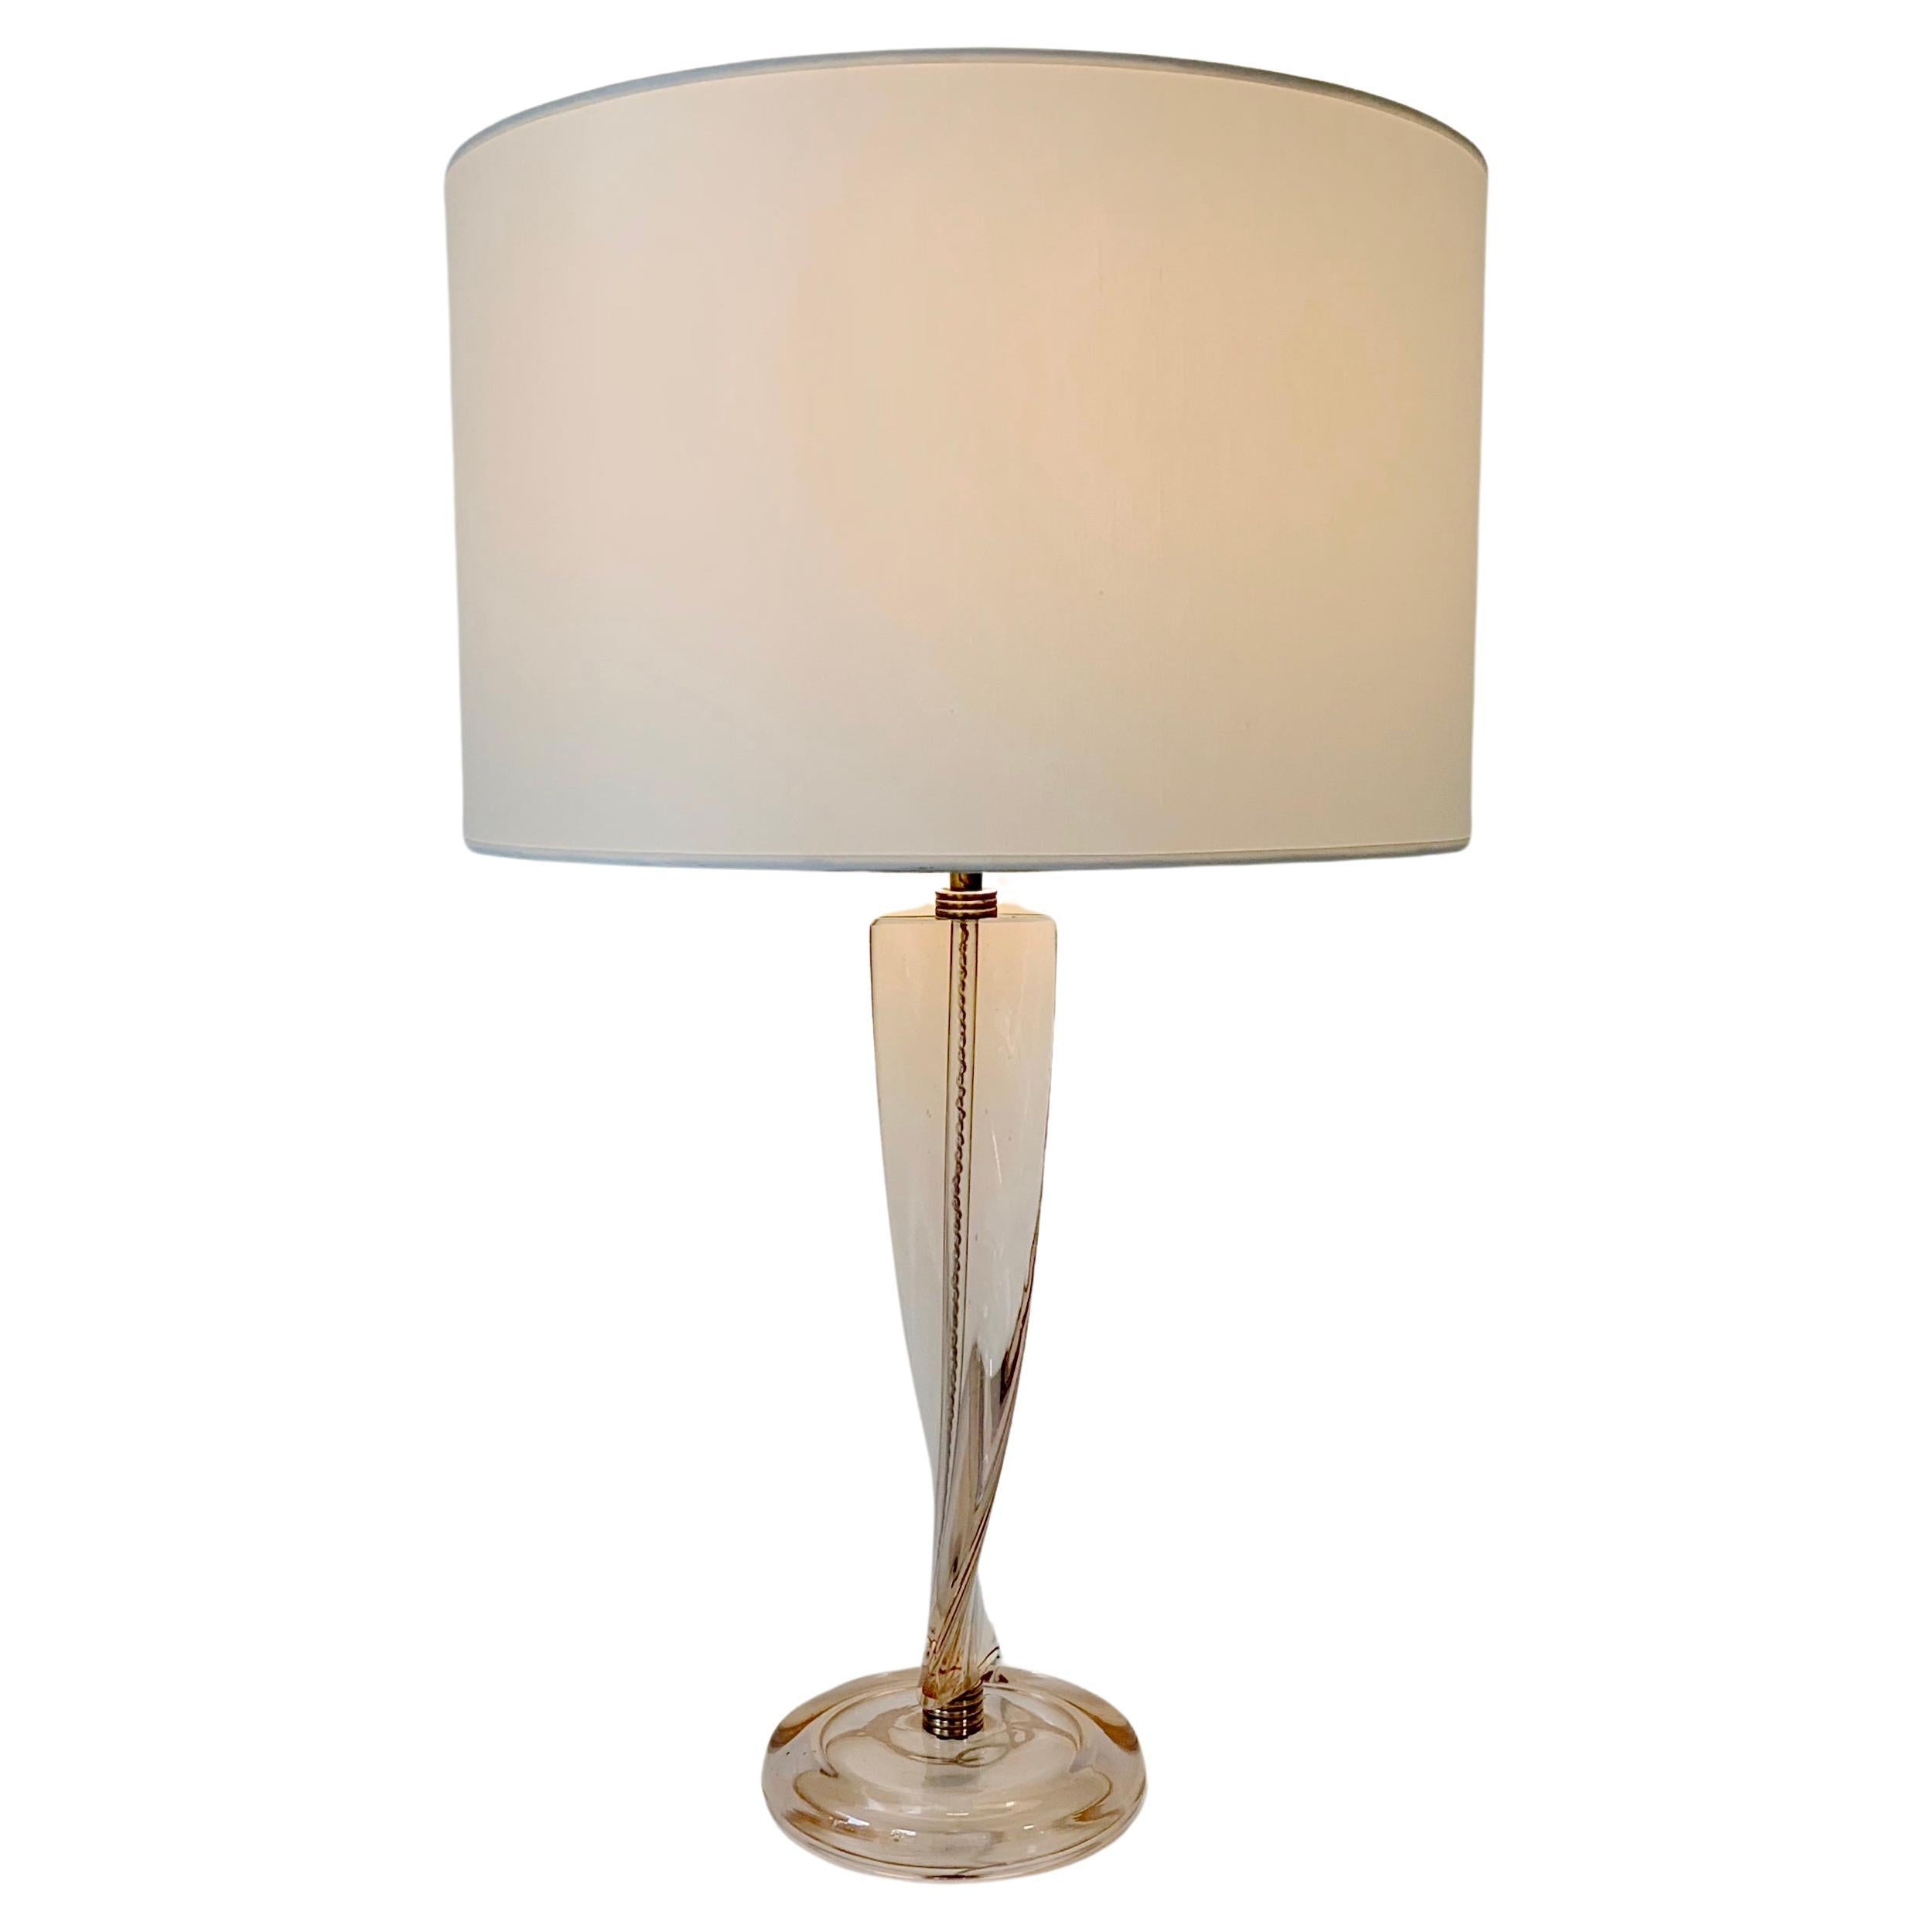 Mid-century modern table lamp, circa 1950, Italy.
Nice pale pink Murano glass.
New white fabric shade.
Rewired, ready for use.
Dimensions: 65 cm total height, diameter of the shade: 40 cm.
All purchases are covered by our Buyer Protection